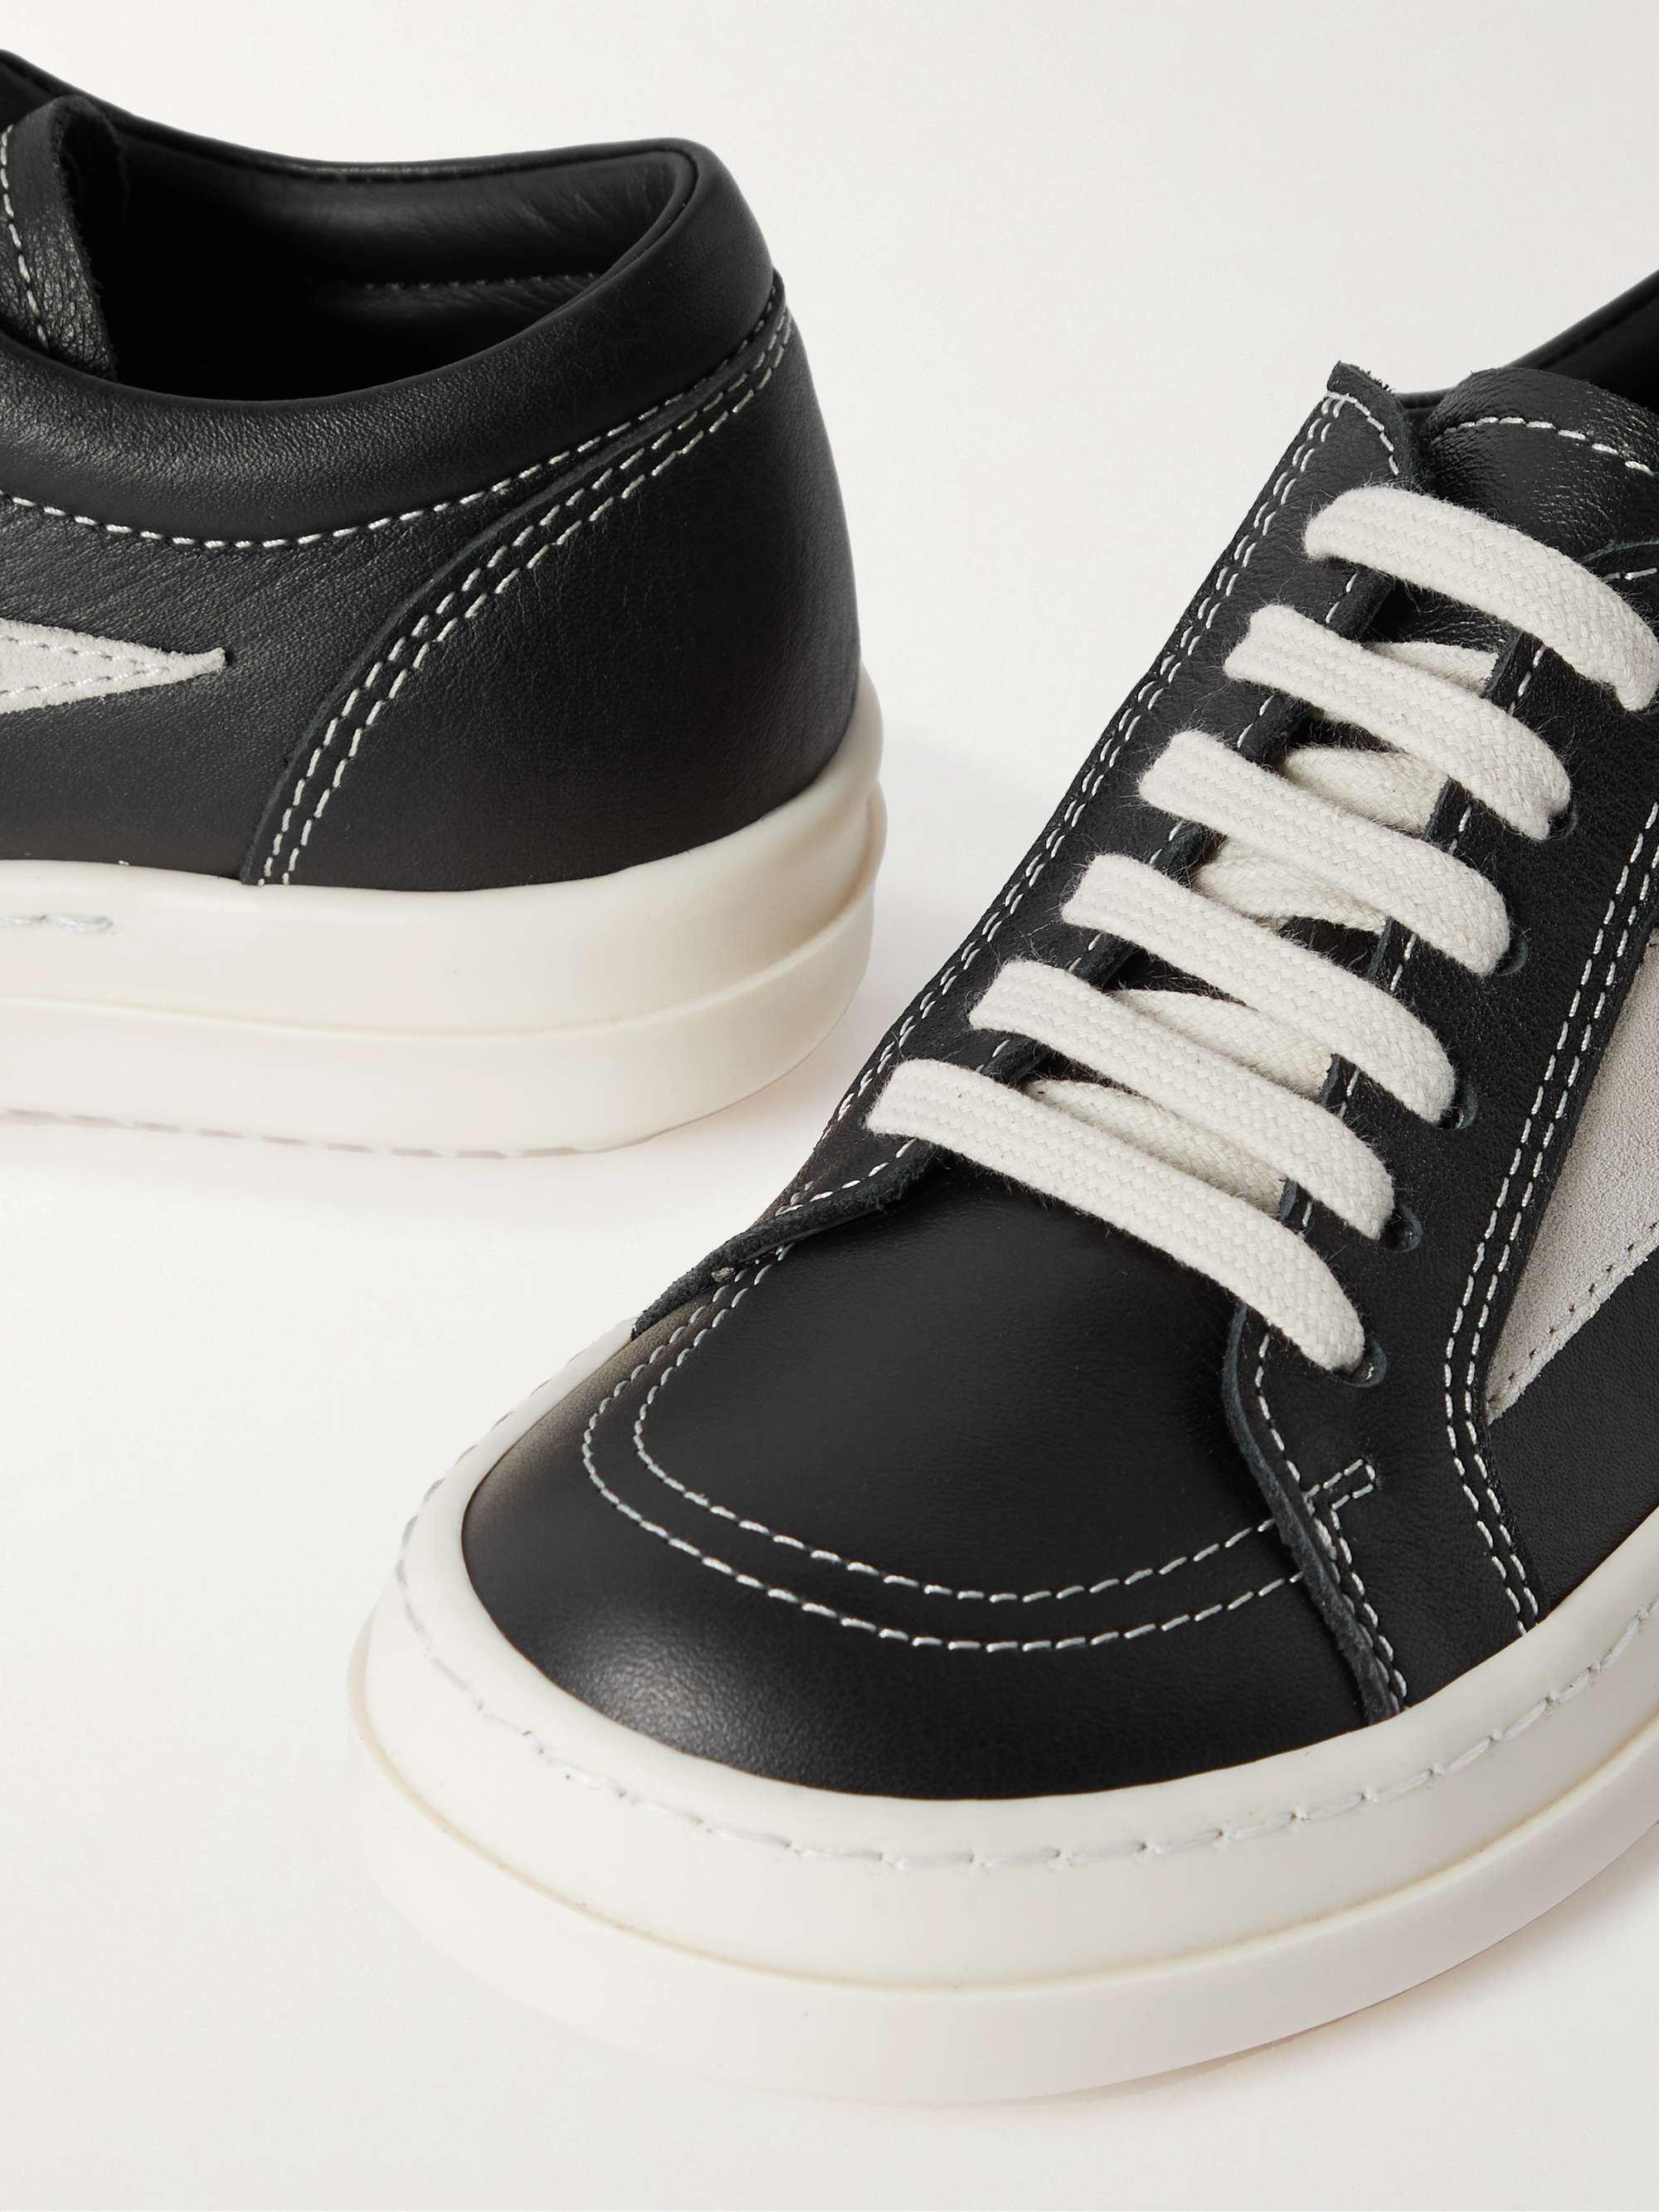 Vintage Suede-Trimmed Leather Sneakers